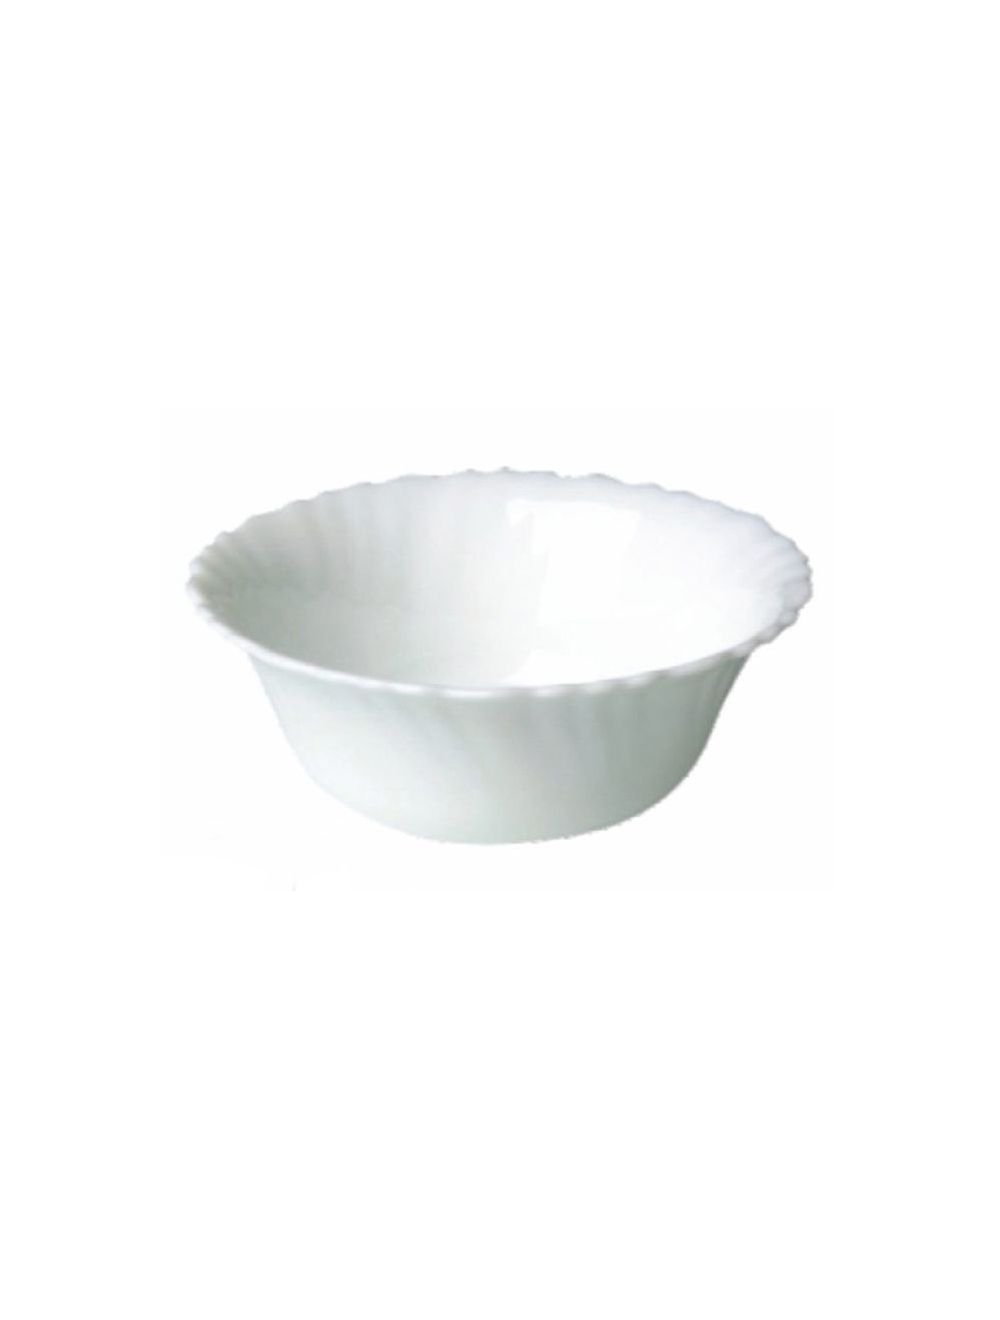 Royalford RF4529 Opal Ware Spin White Bowl, 6 Inch